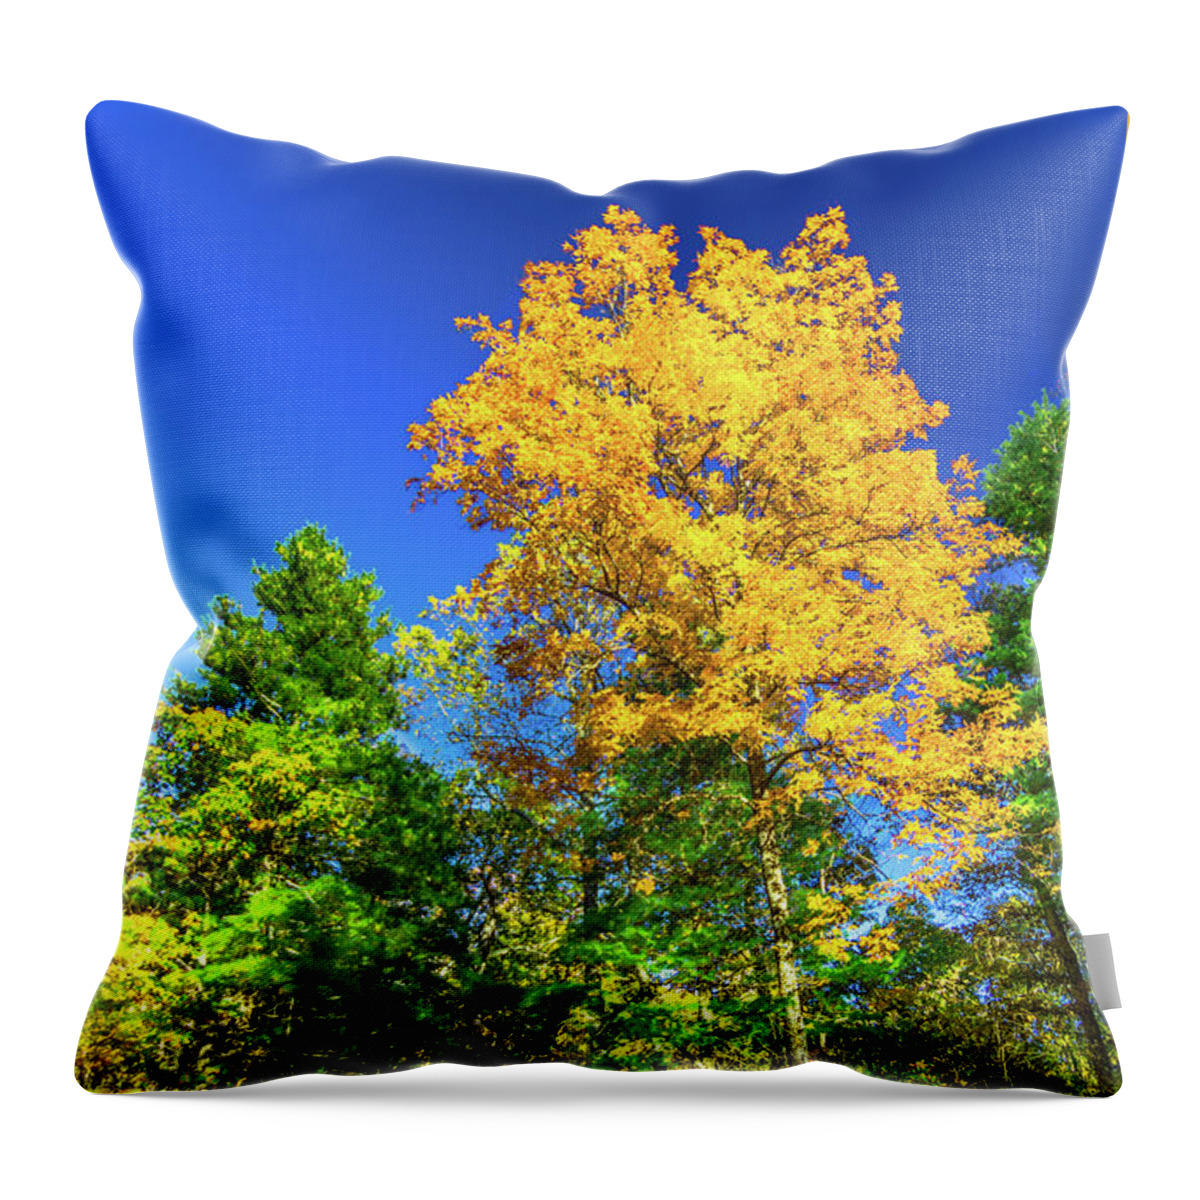 Blue Throw Pillow featuring the photograph Mountain Sugar Maple Tree by Norma Brandsberg